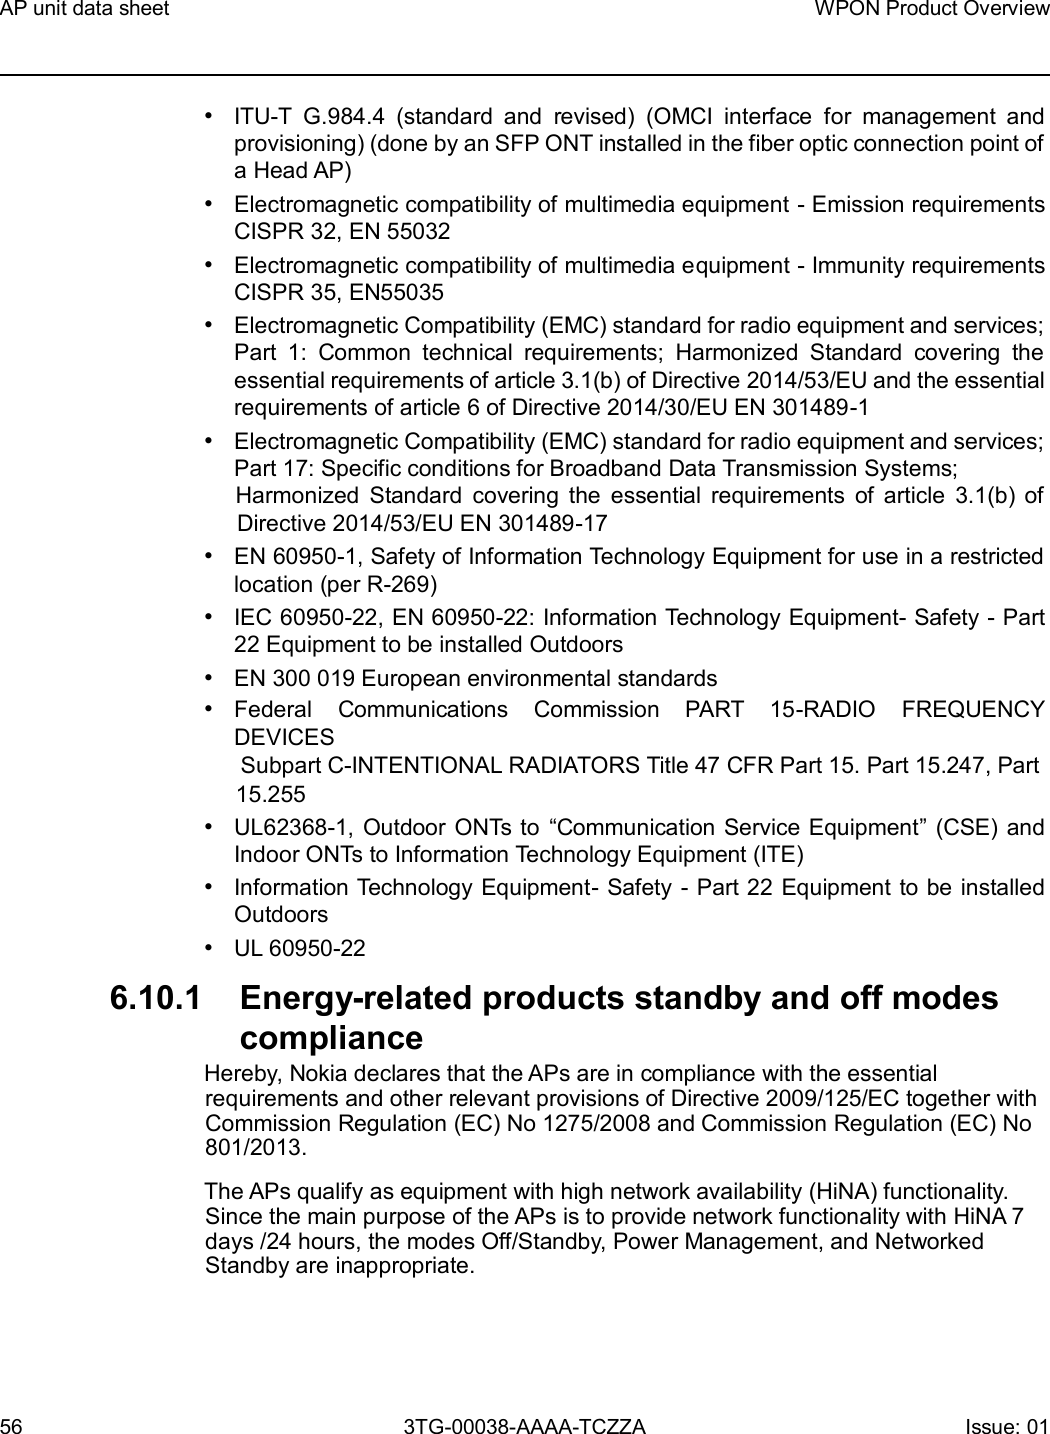 Page 56 of Nokia Bell 7577WPONAPAC WPON User Manual WPON Product Overview